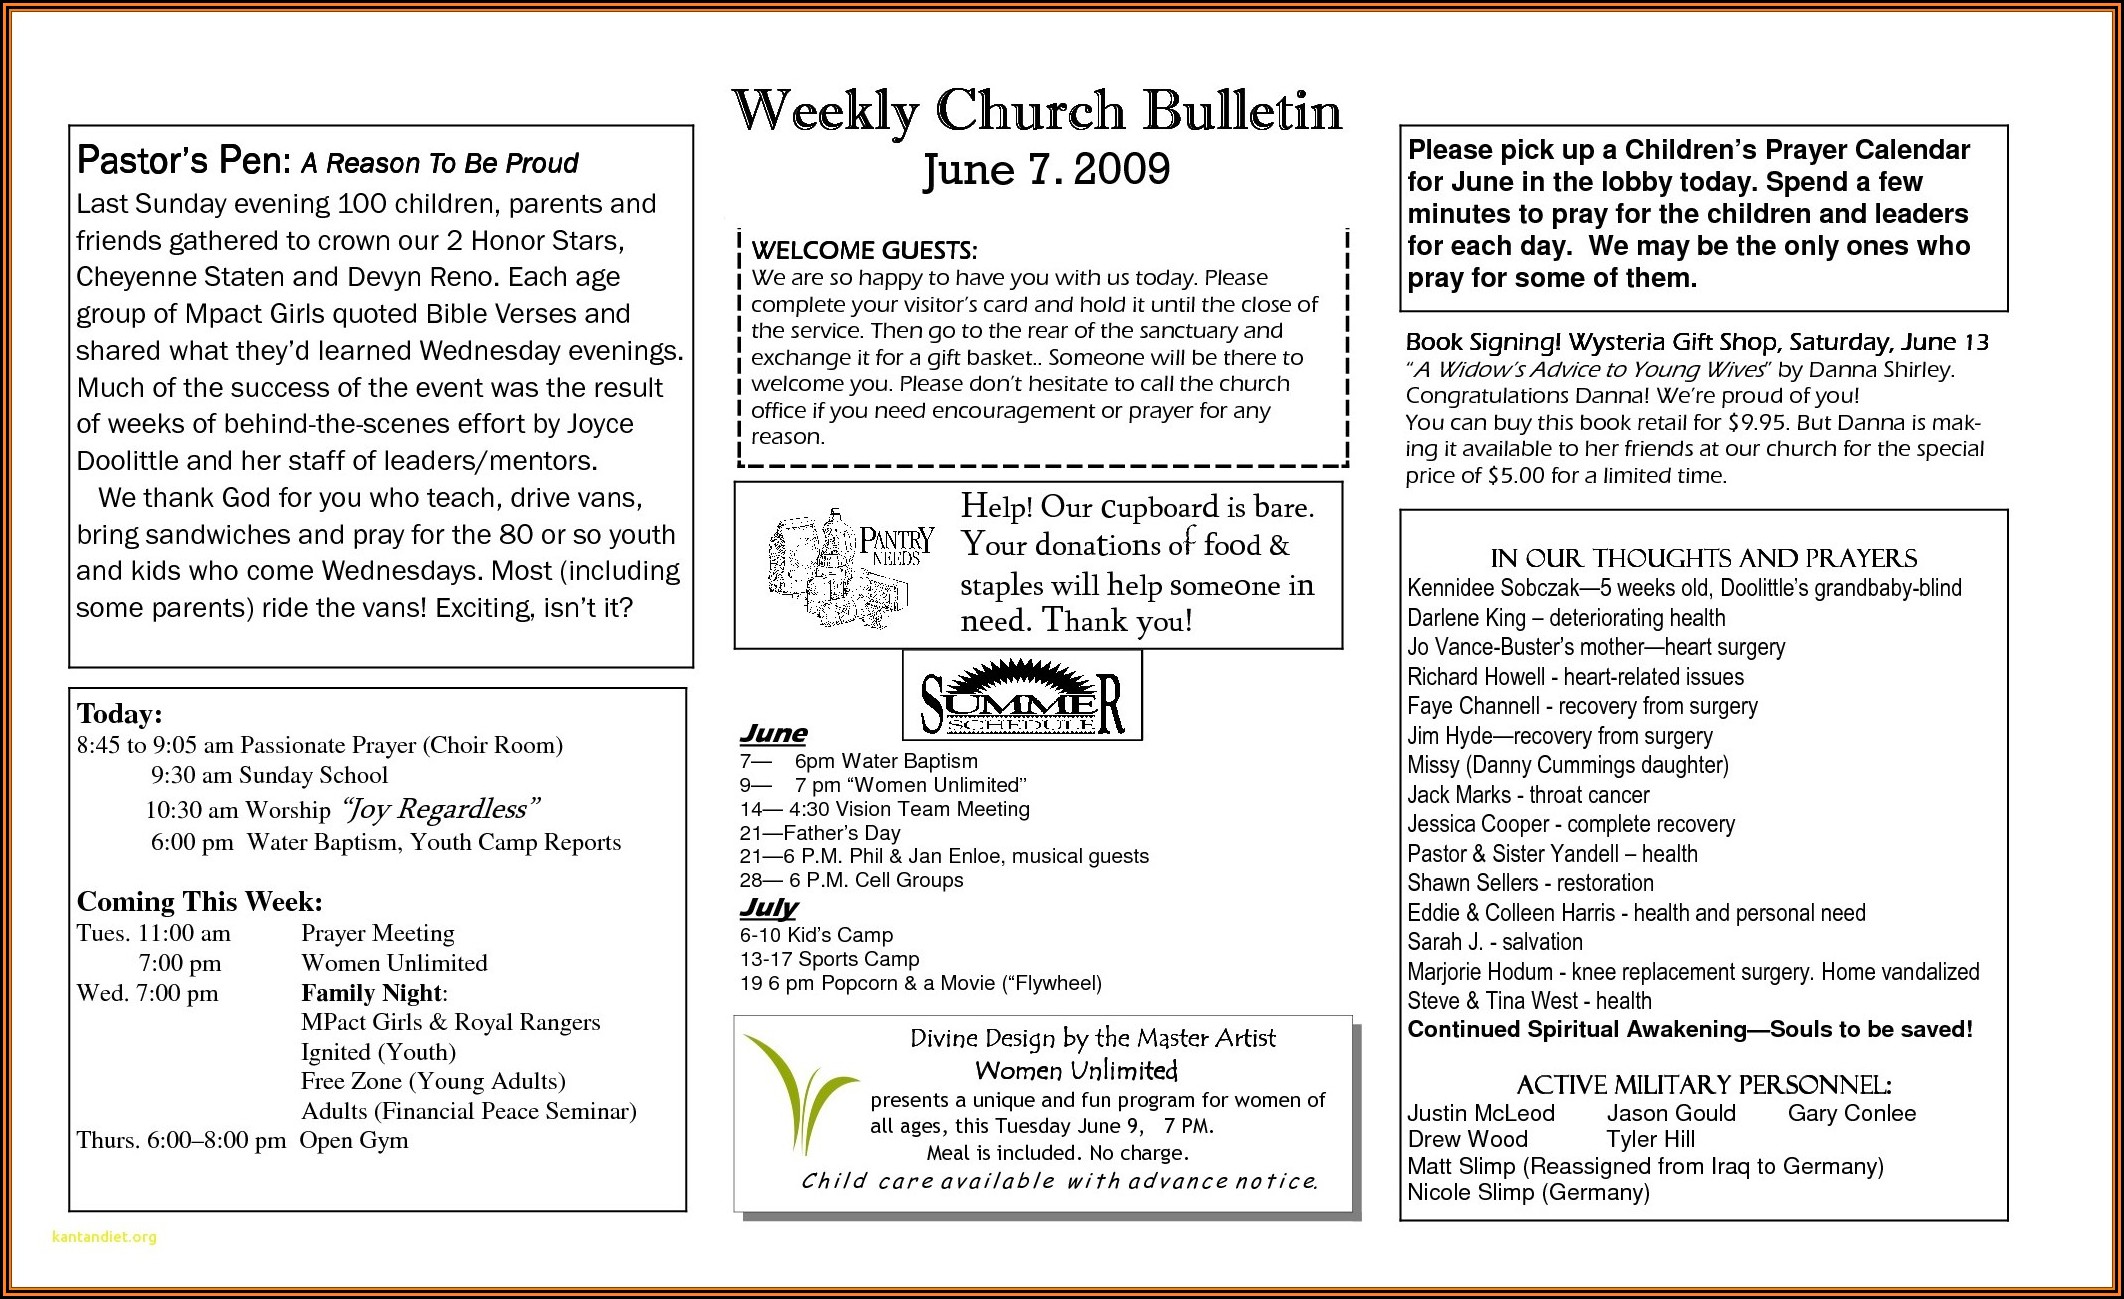 Free Word Templates For Church Programs